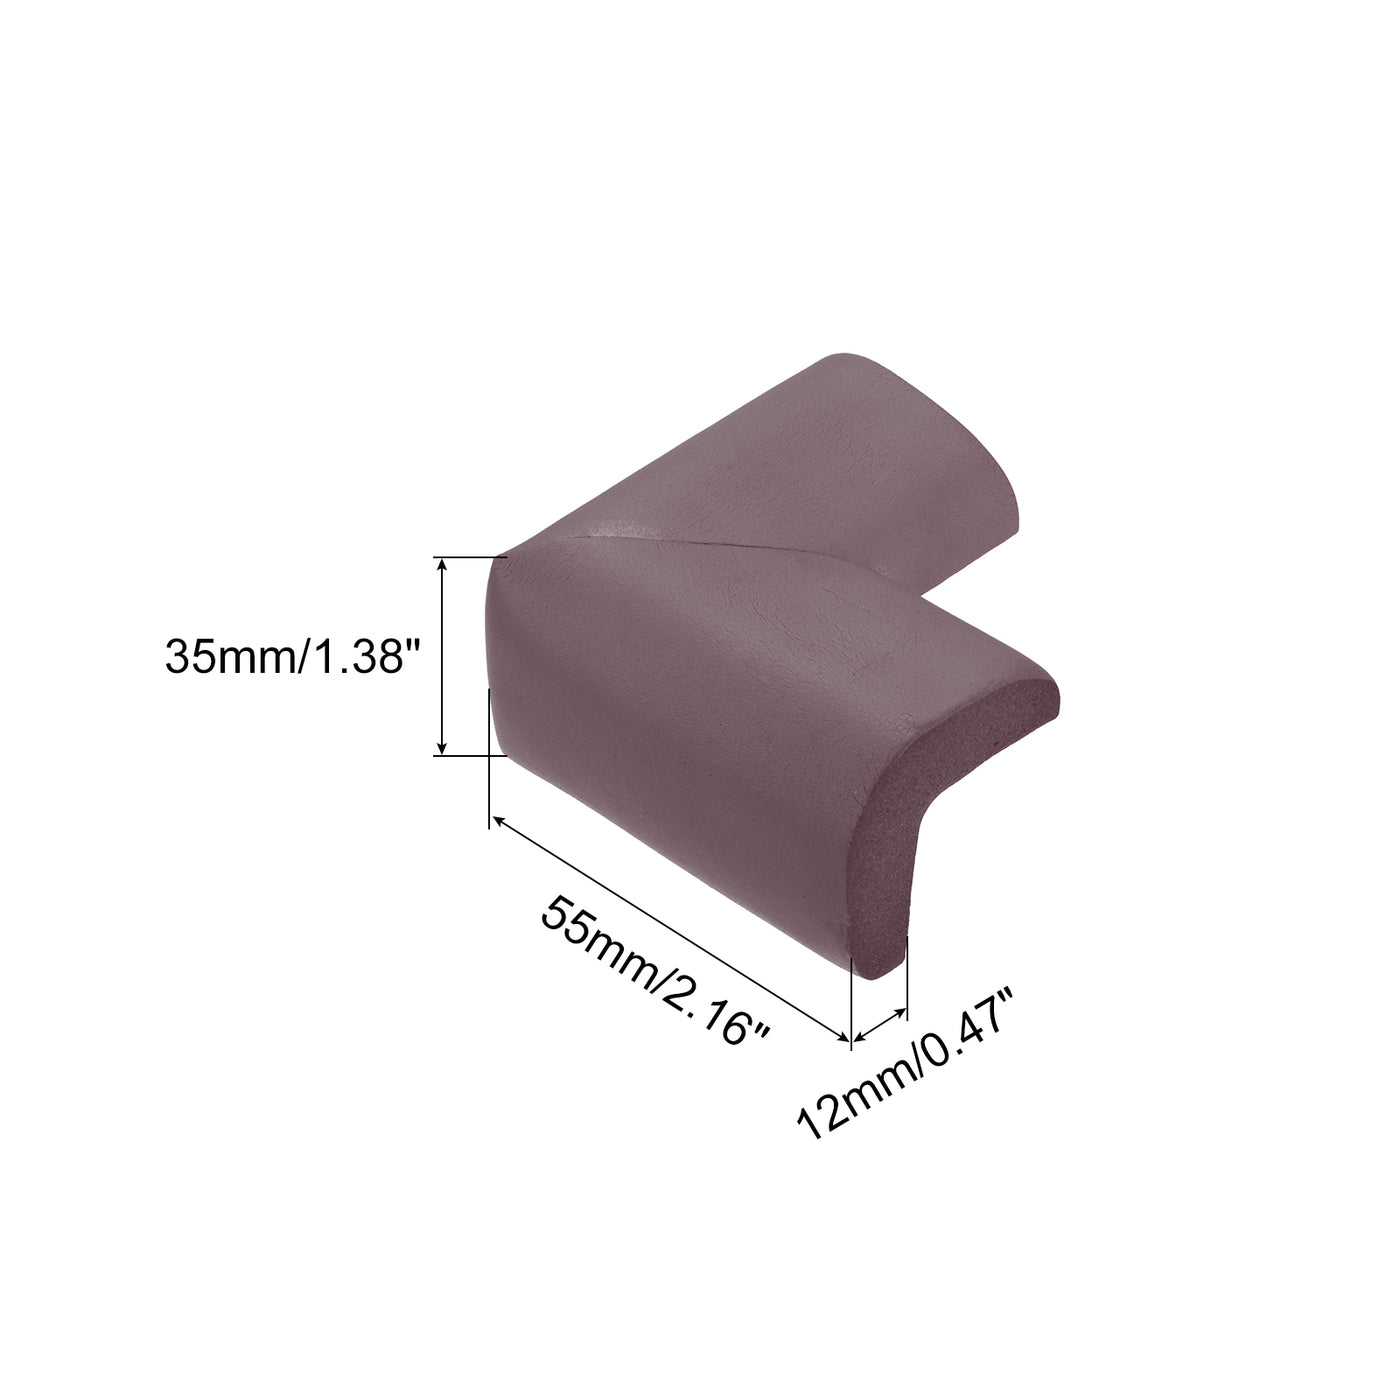 uxcell Uxcell Corner Guards Edge Protectors, 4Pack Foam Bumper Thicken, 55mm Brown